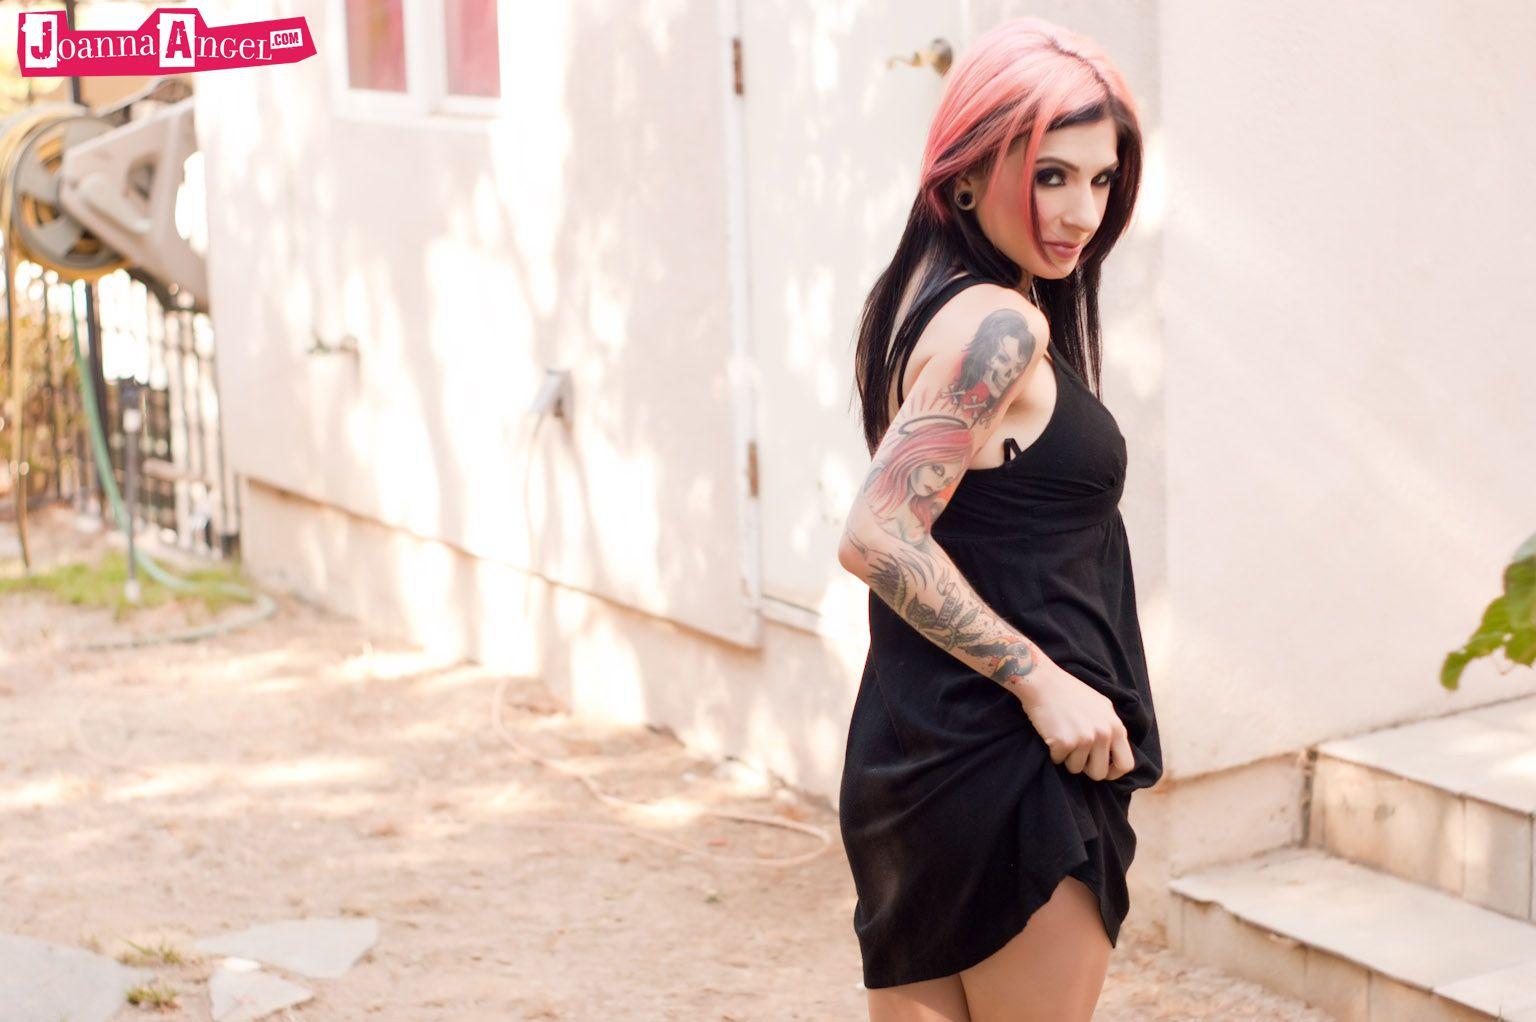 Pictures of Joanna Angel showing her pussy in public #55529279